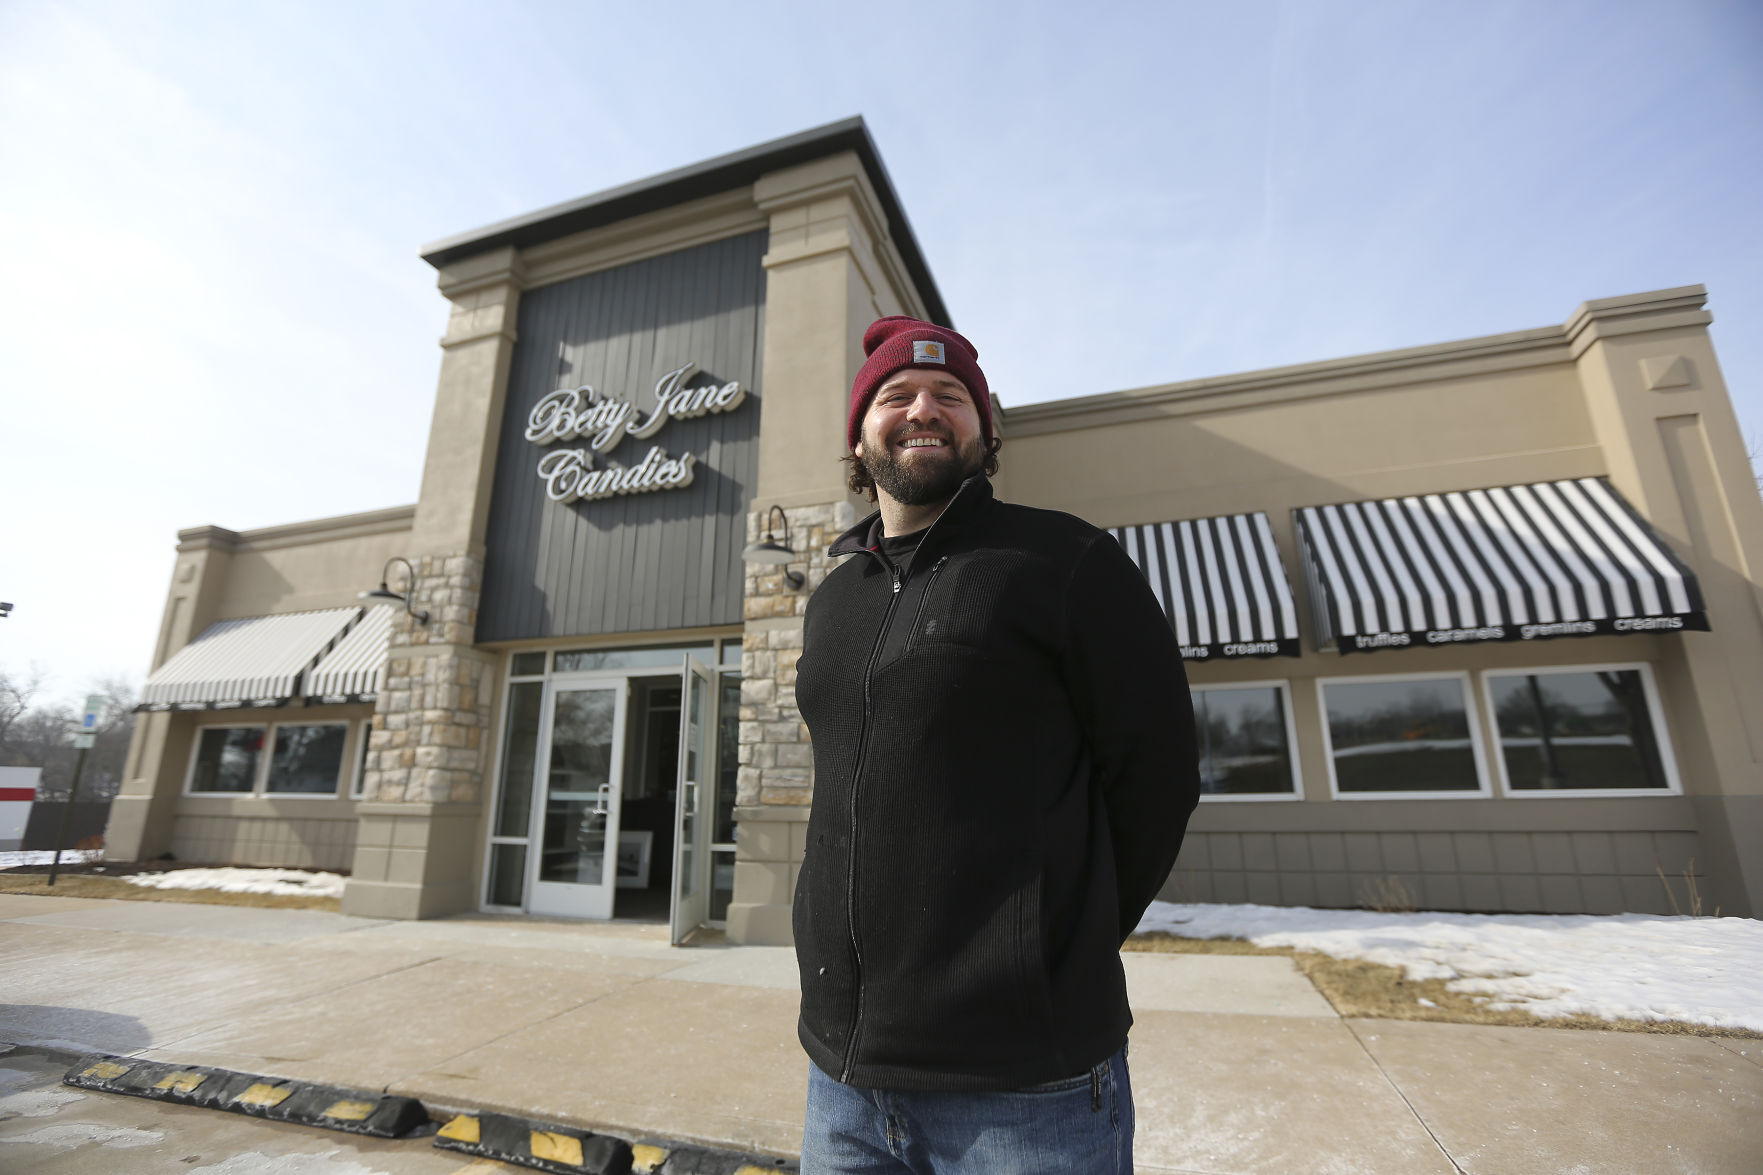 Siegert stands at the new location.    PHOTO CREDIT: Dave Kettering/Telegraph Herald